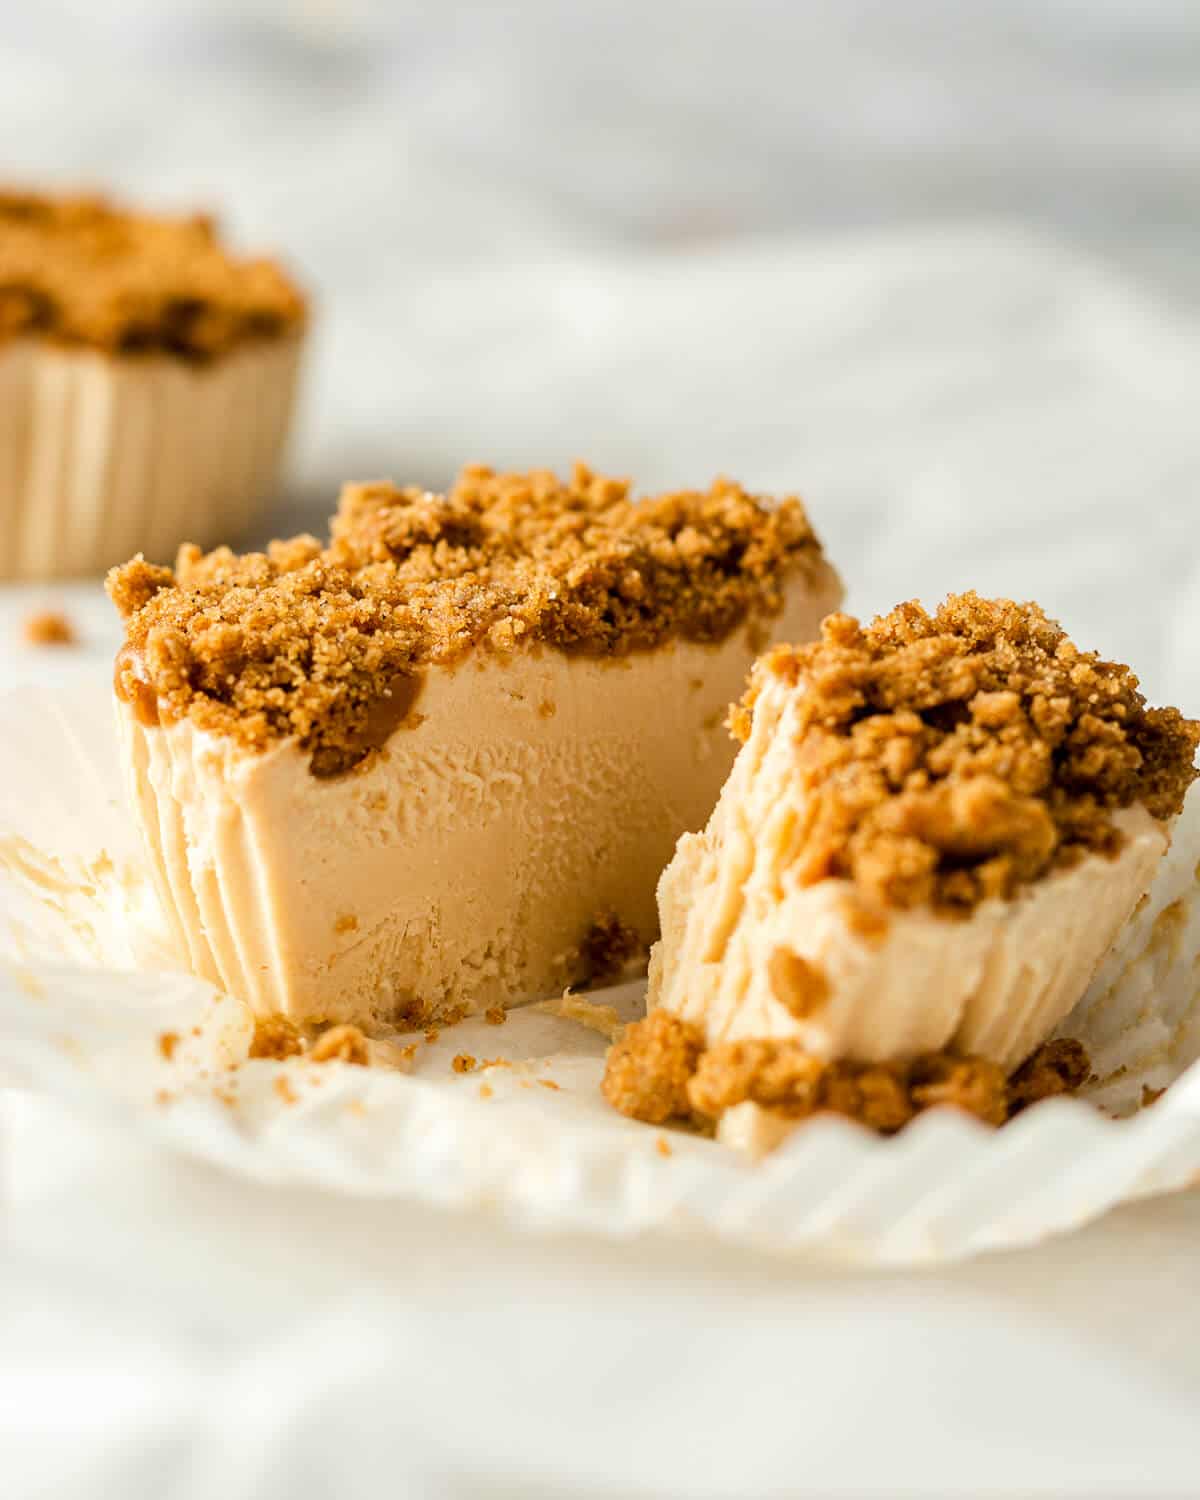 A mini biscoff cheesecake in a cupcake liner is cut in half and a bite is missing from one of the halves. There is another cheesecake in the background.